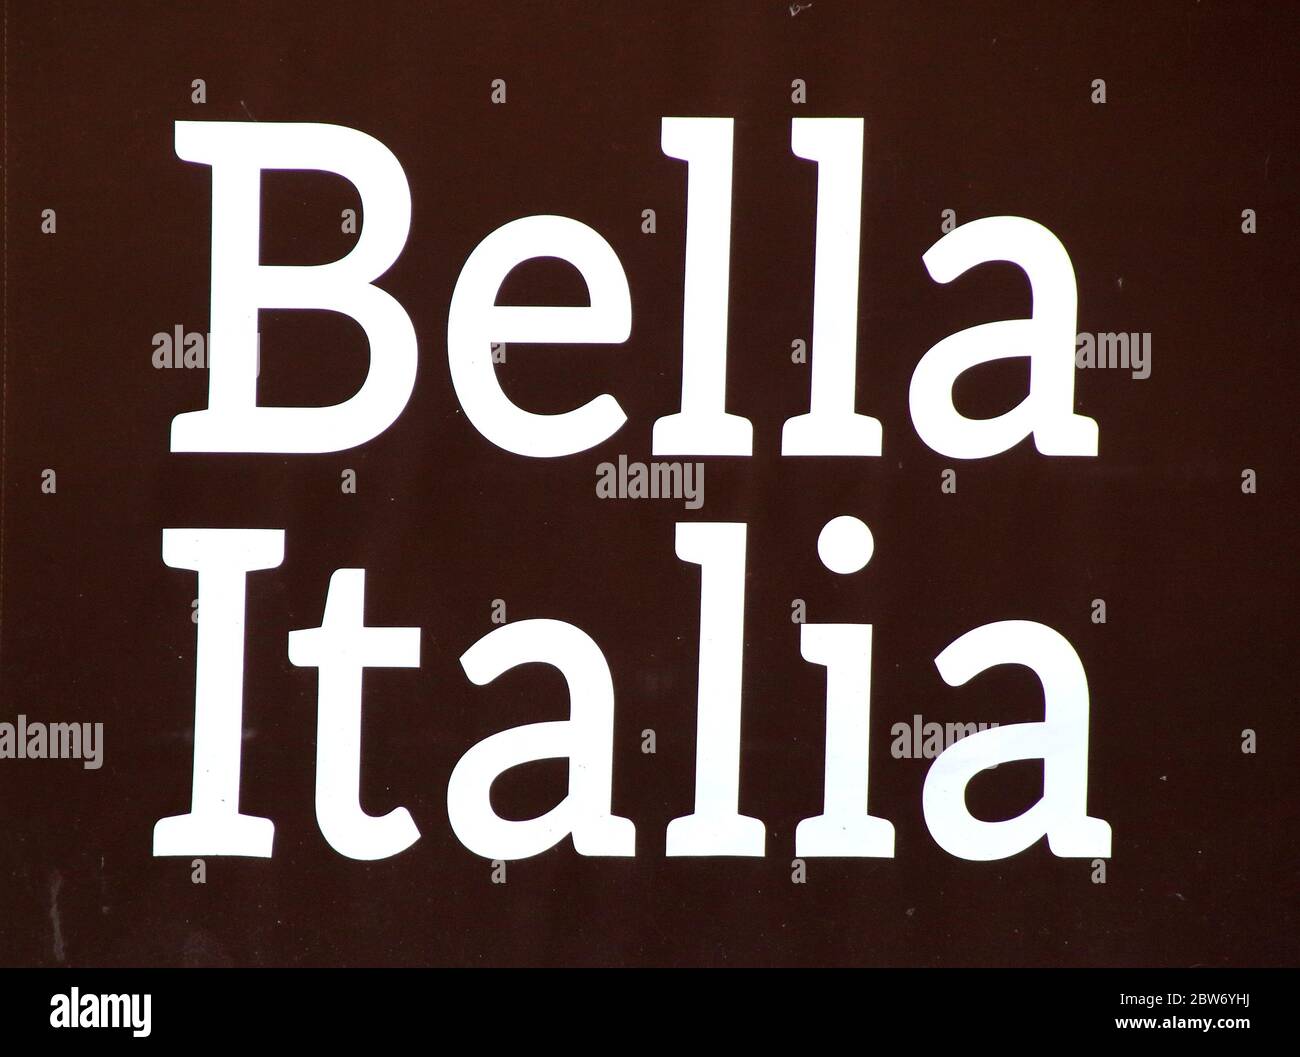 Bella Italia logo seen at one of their branches.UK Government has announced that a number of non-essential retail enterprises such as Outdoor markets, car showrooms can reopen from June 1st and June 15th other shops, department stores will also open and shopping centres, restaurants and bars will still remain shut. Stock Photo